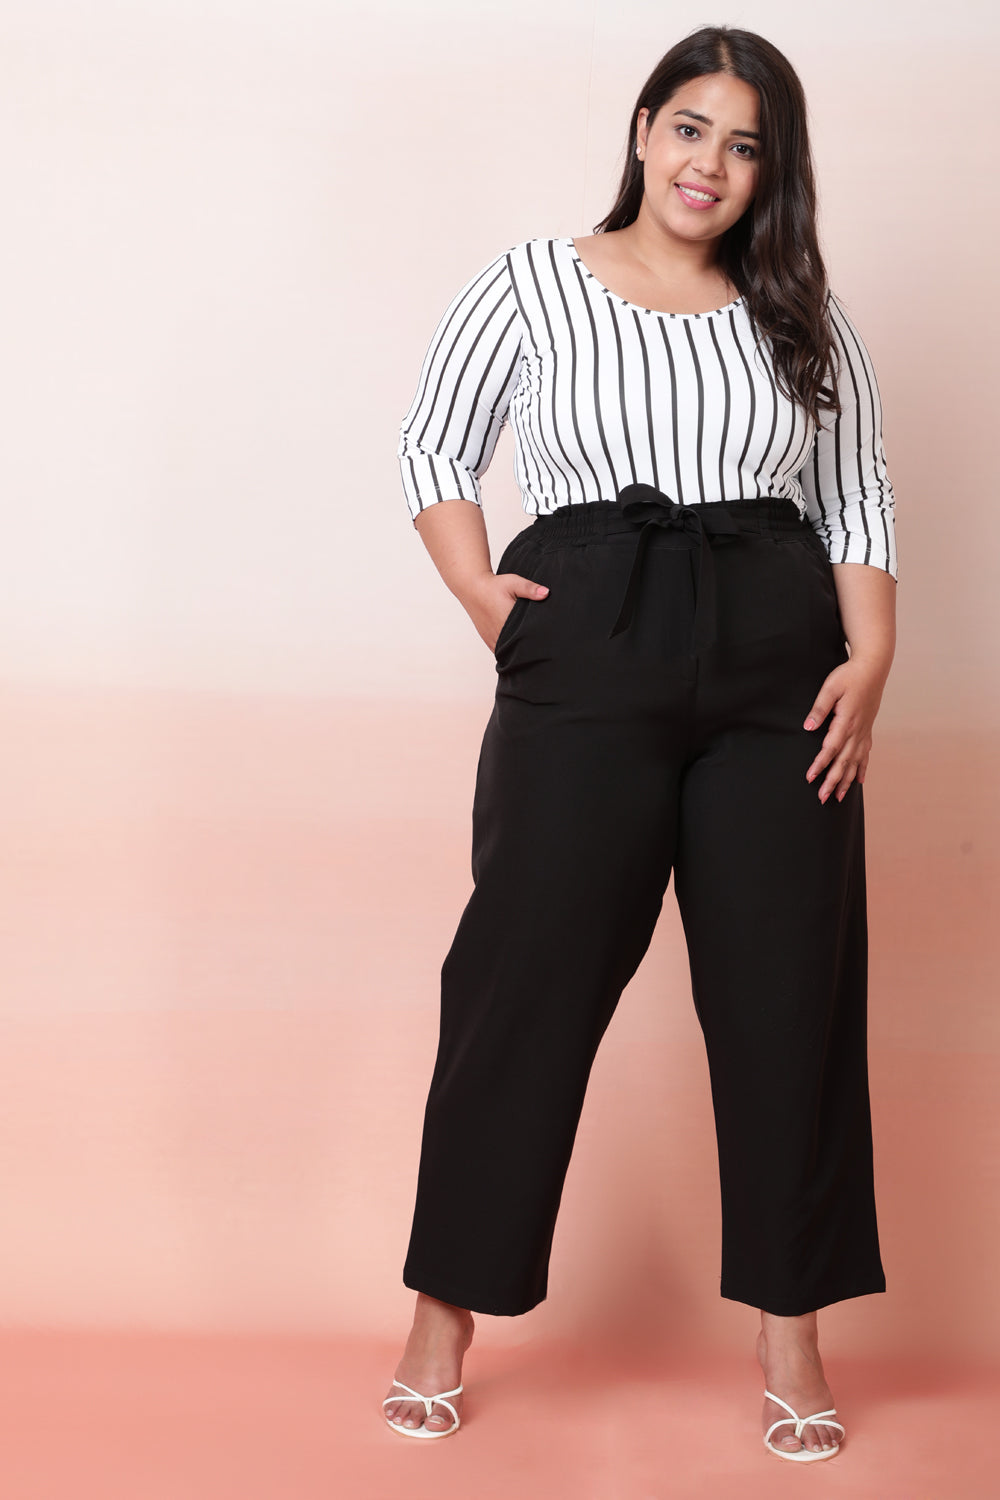 Buy High Waist Pants for Women The Perfect Solution for Tummy Control